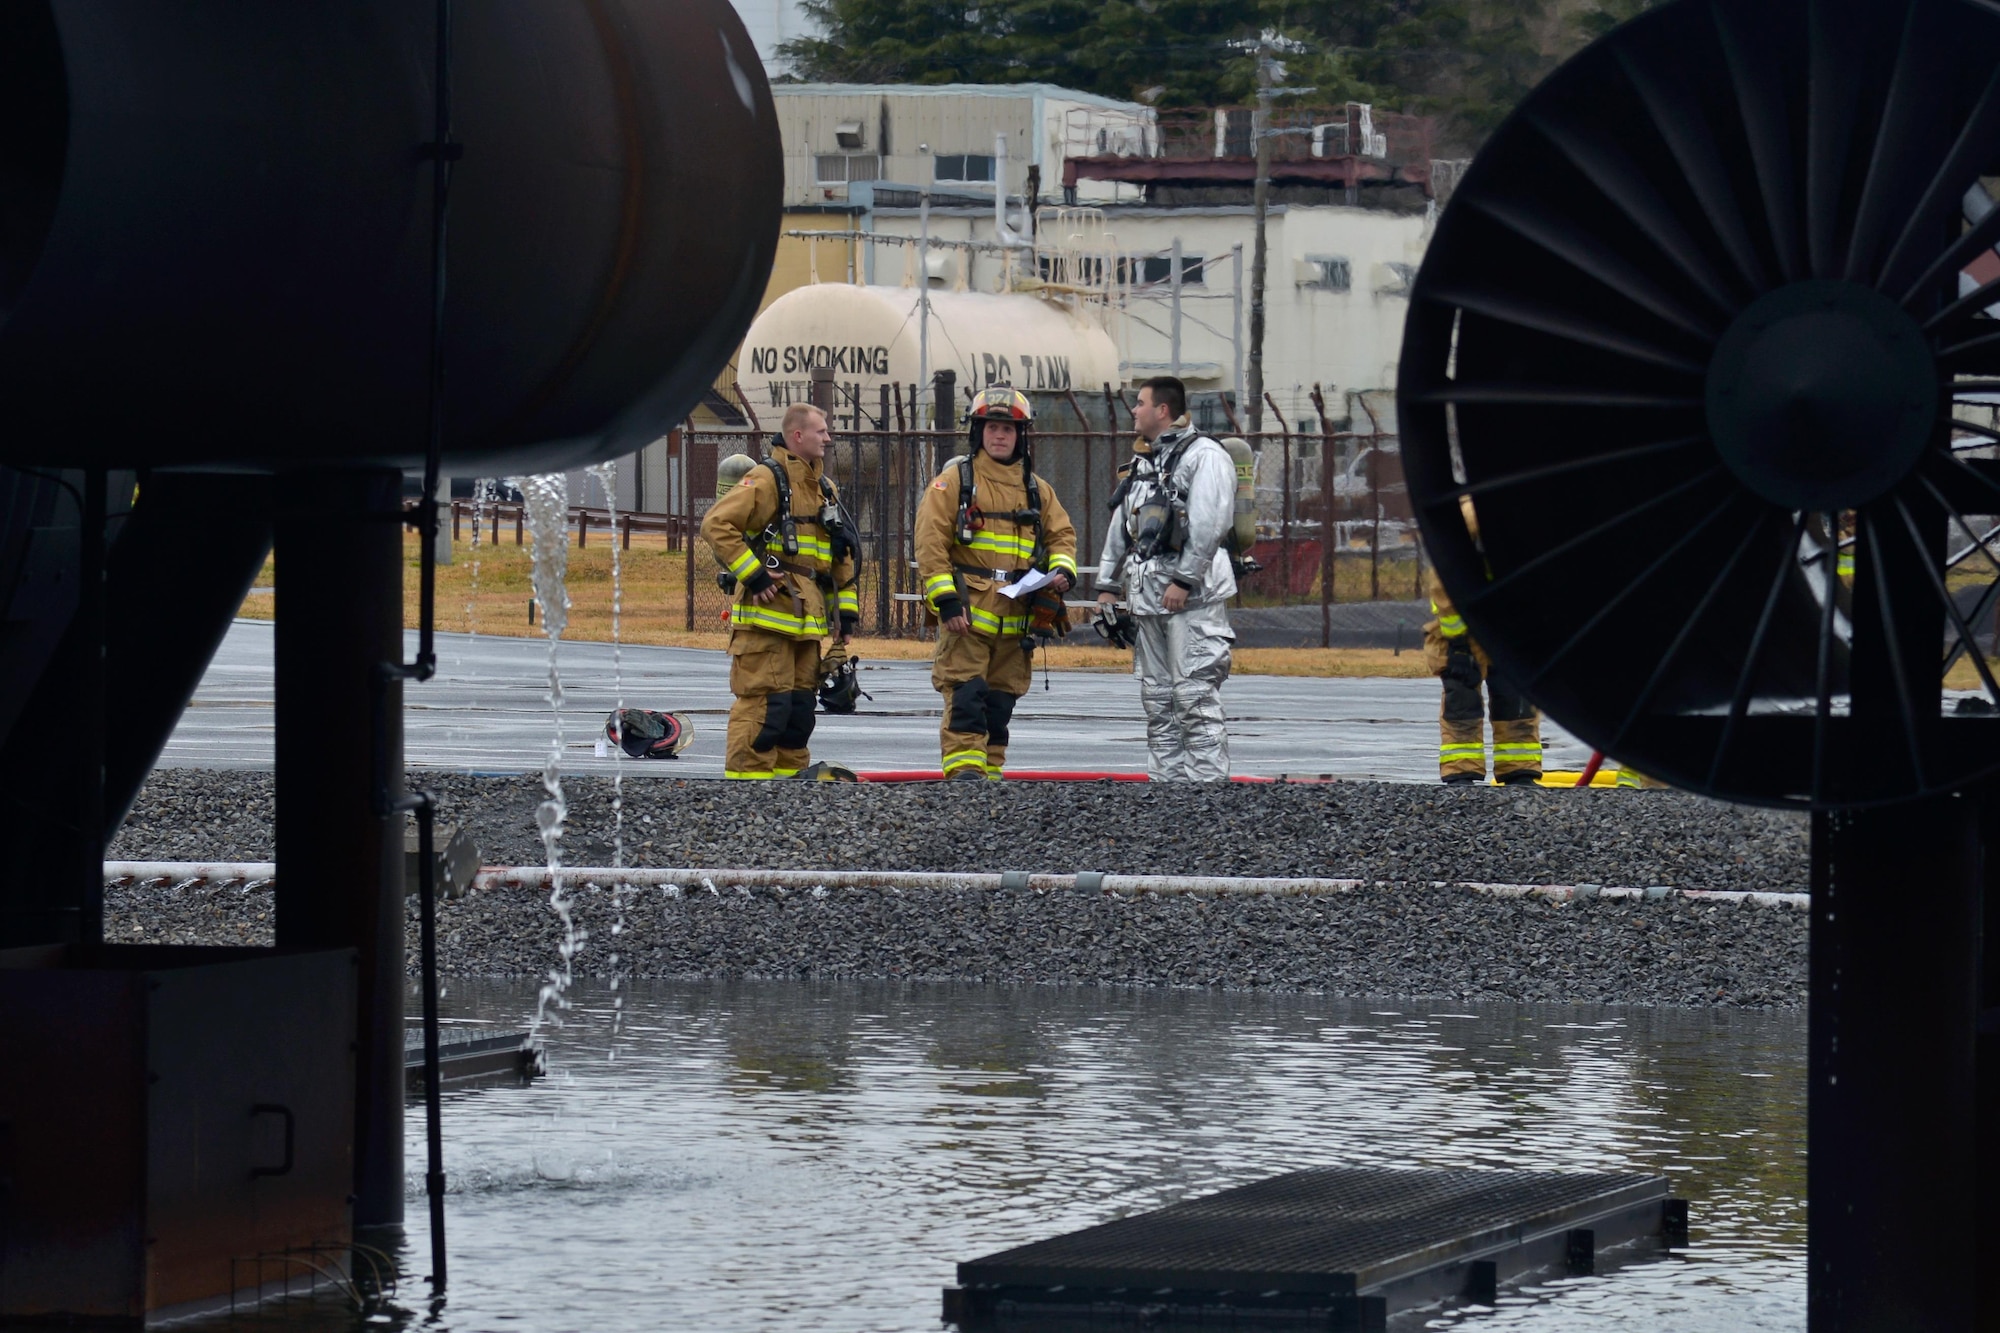 Firefighters with the 374th Civil Engineer Squadron discuss the previous training scenario at Yokota Air Base, Japan, Dec. 14, 2016. The training consisted of a training aircraft burning with two engine fires with leaking fuel spreading on the ground to simulate an aircraft on the runway needing assistance. (U.S. Air Force photo by Staff Sgt. David Owsianka)